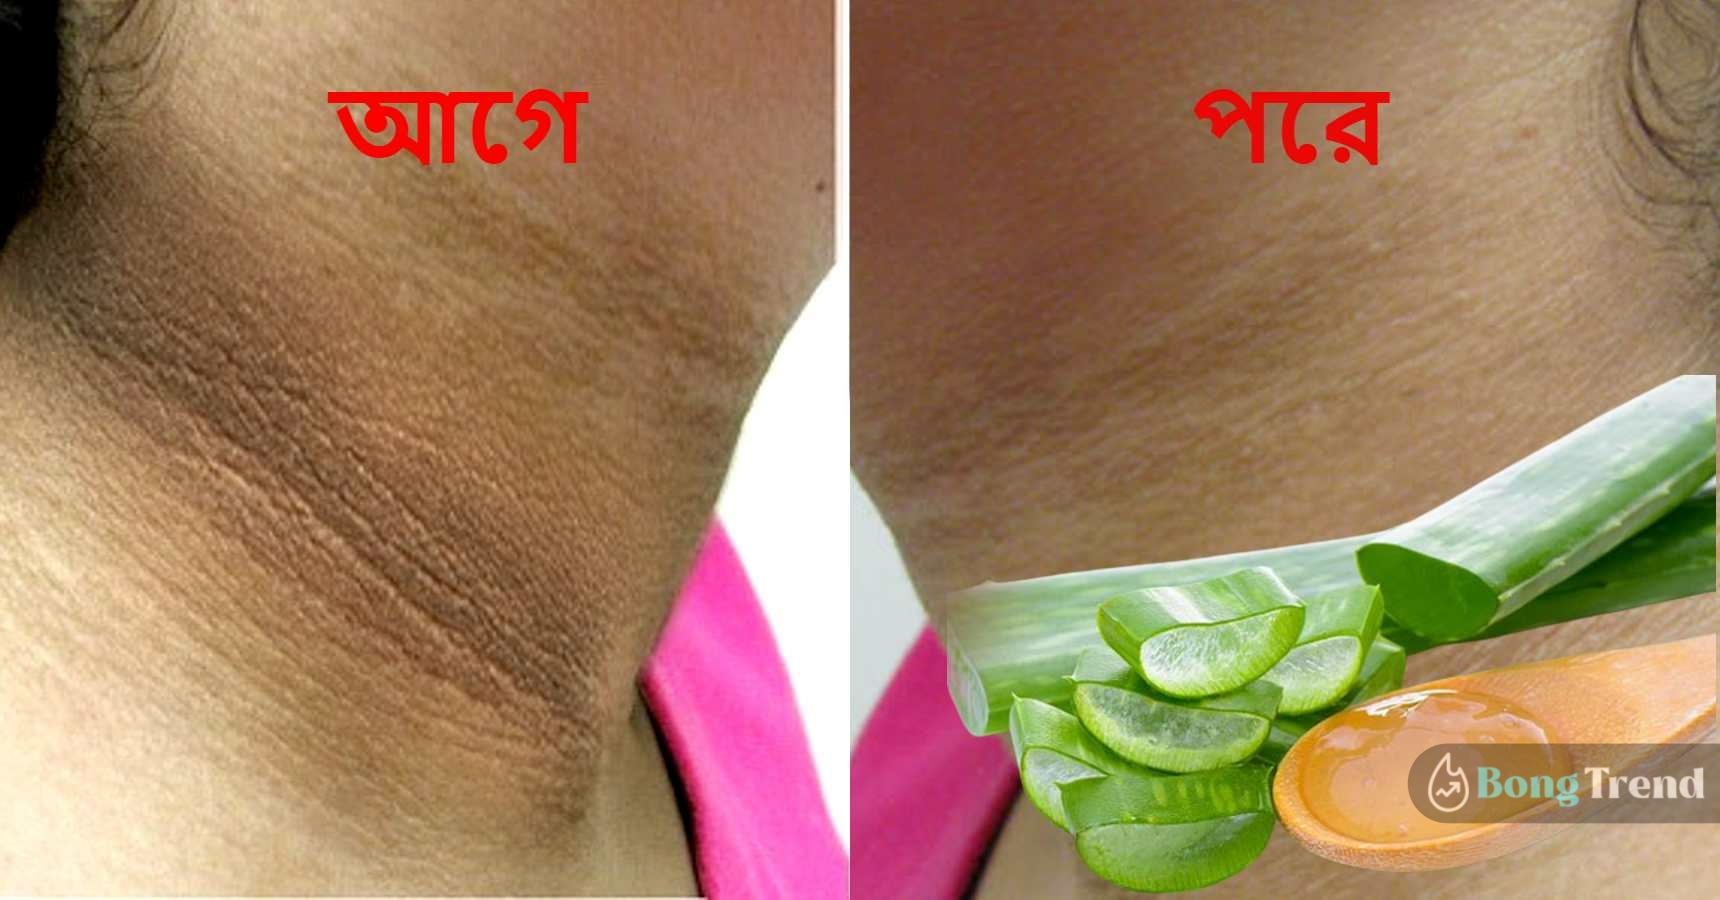 remove black spots from neck home remedy